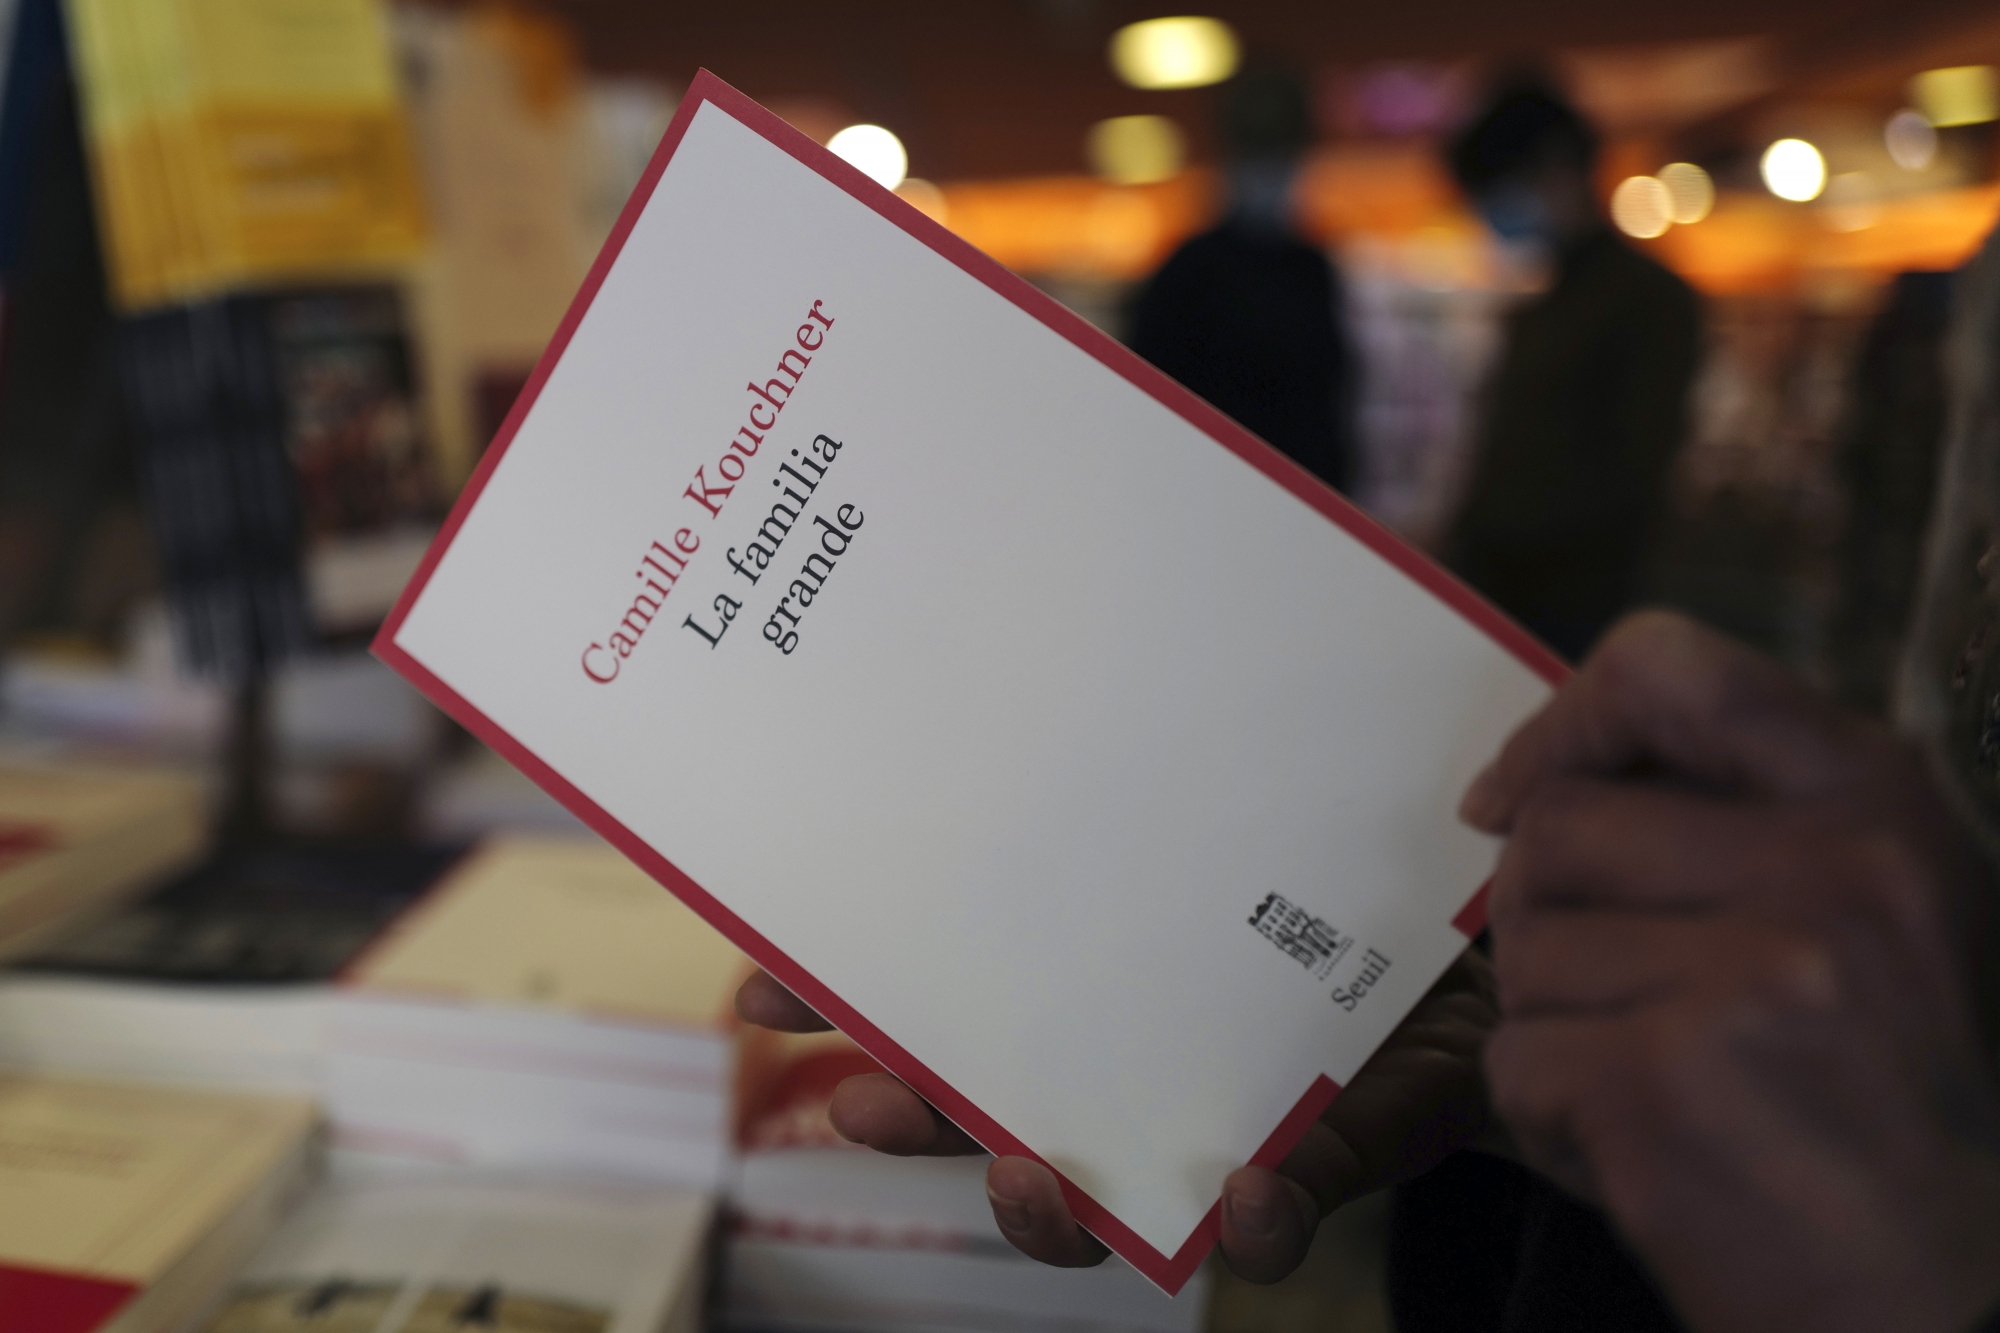 A person holds the book La Familia Grande, by Camille Kouchner, in a bookstore of Paris, Wednesday, Jan. 20, 2021. The book written by prominent French political expert Olivier Duhamel's stepdaughter, Camille Kouchner, accused him of abusing her twin brother during the late 1980s, when the siblings were 13-years-old. The French government pledged on Thursday to toughen laws on the rape of children, as a massive online movement has seen hundreds of victims share accounts about sexual abuses within their families under the hashtag #MeTooInceste. (AP Photo/Francois Mori)